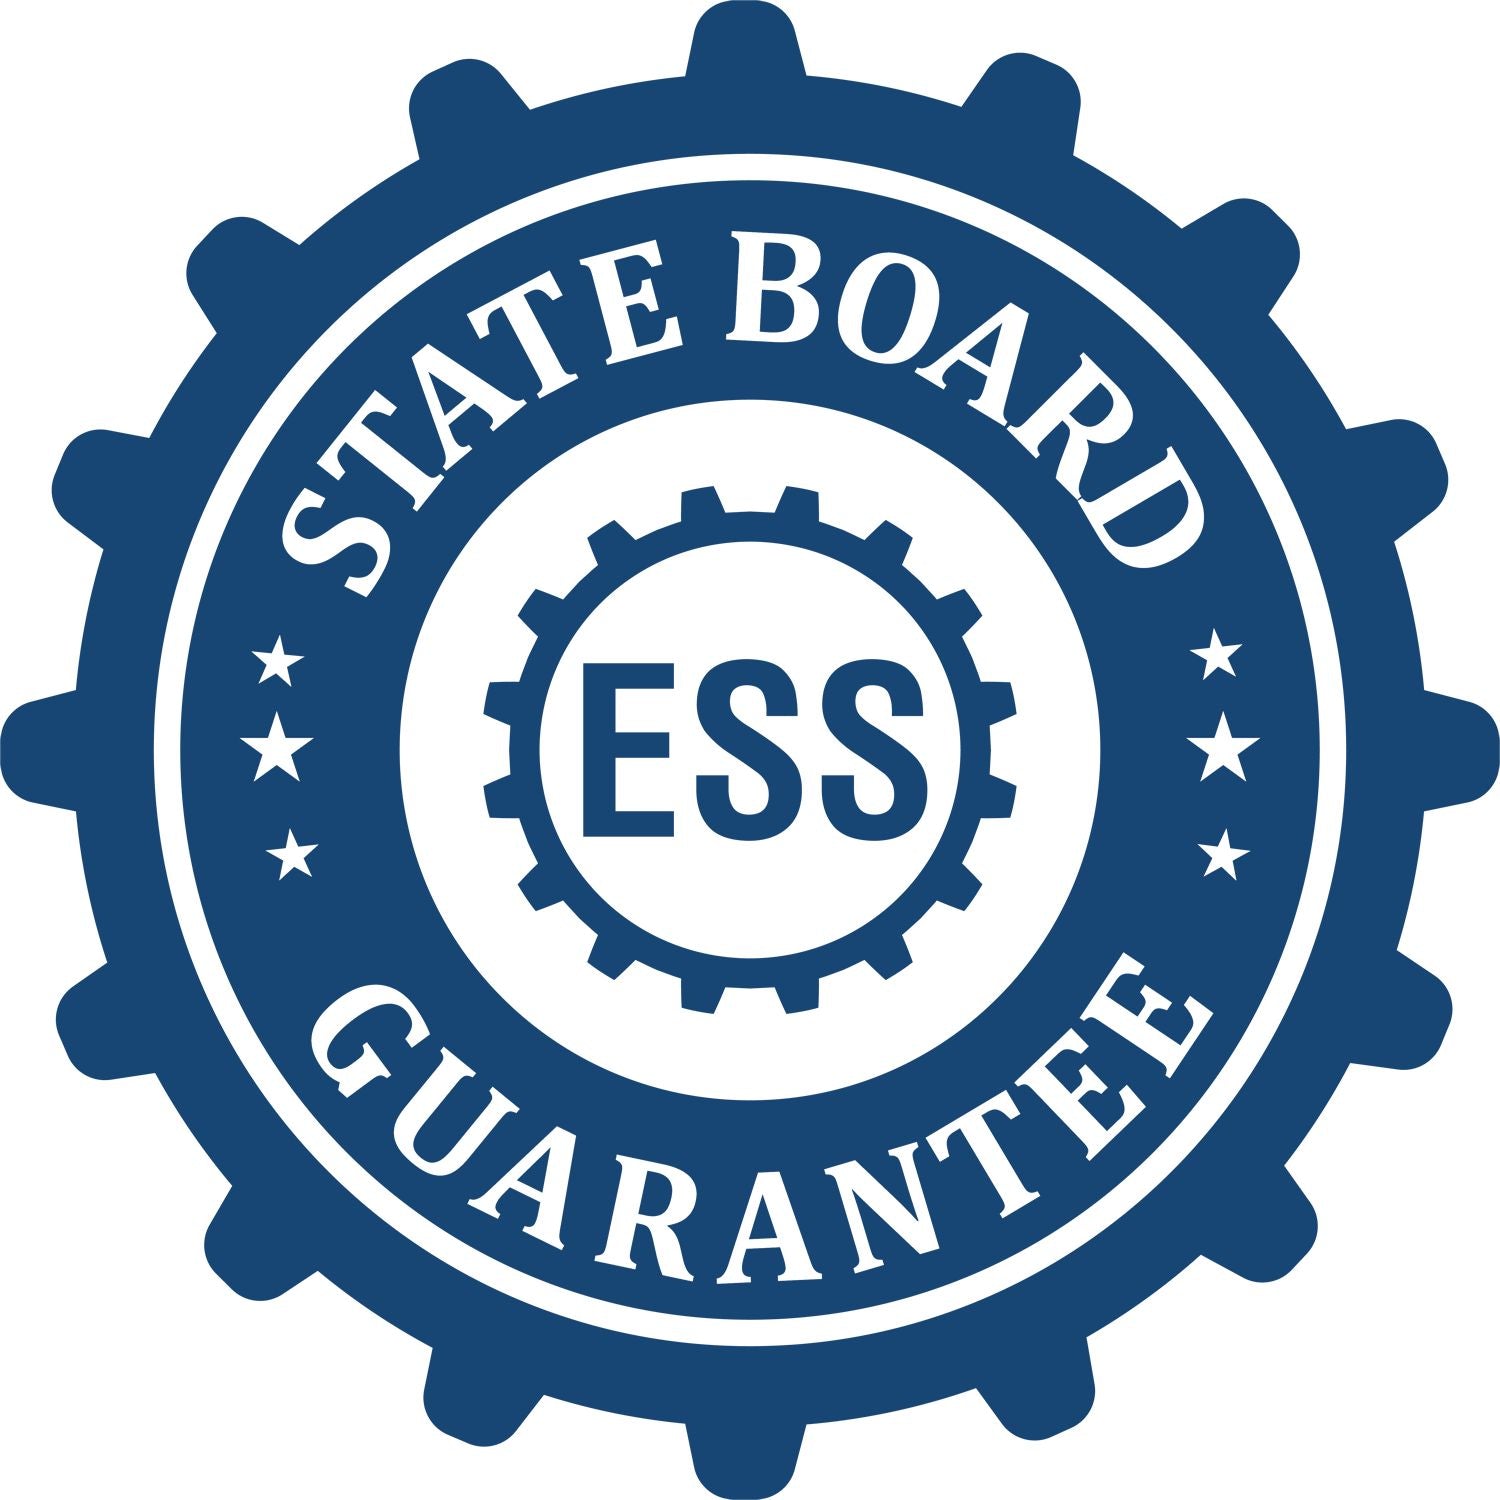 An emblem in a gear shape illustrating a state board guarantee for the Soft Oregon Professional Engineer Seal product.